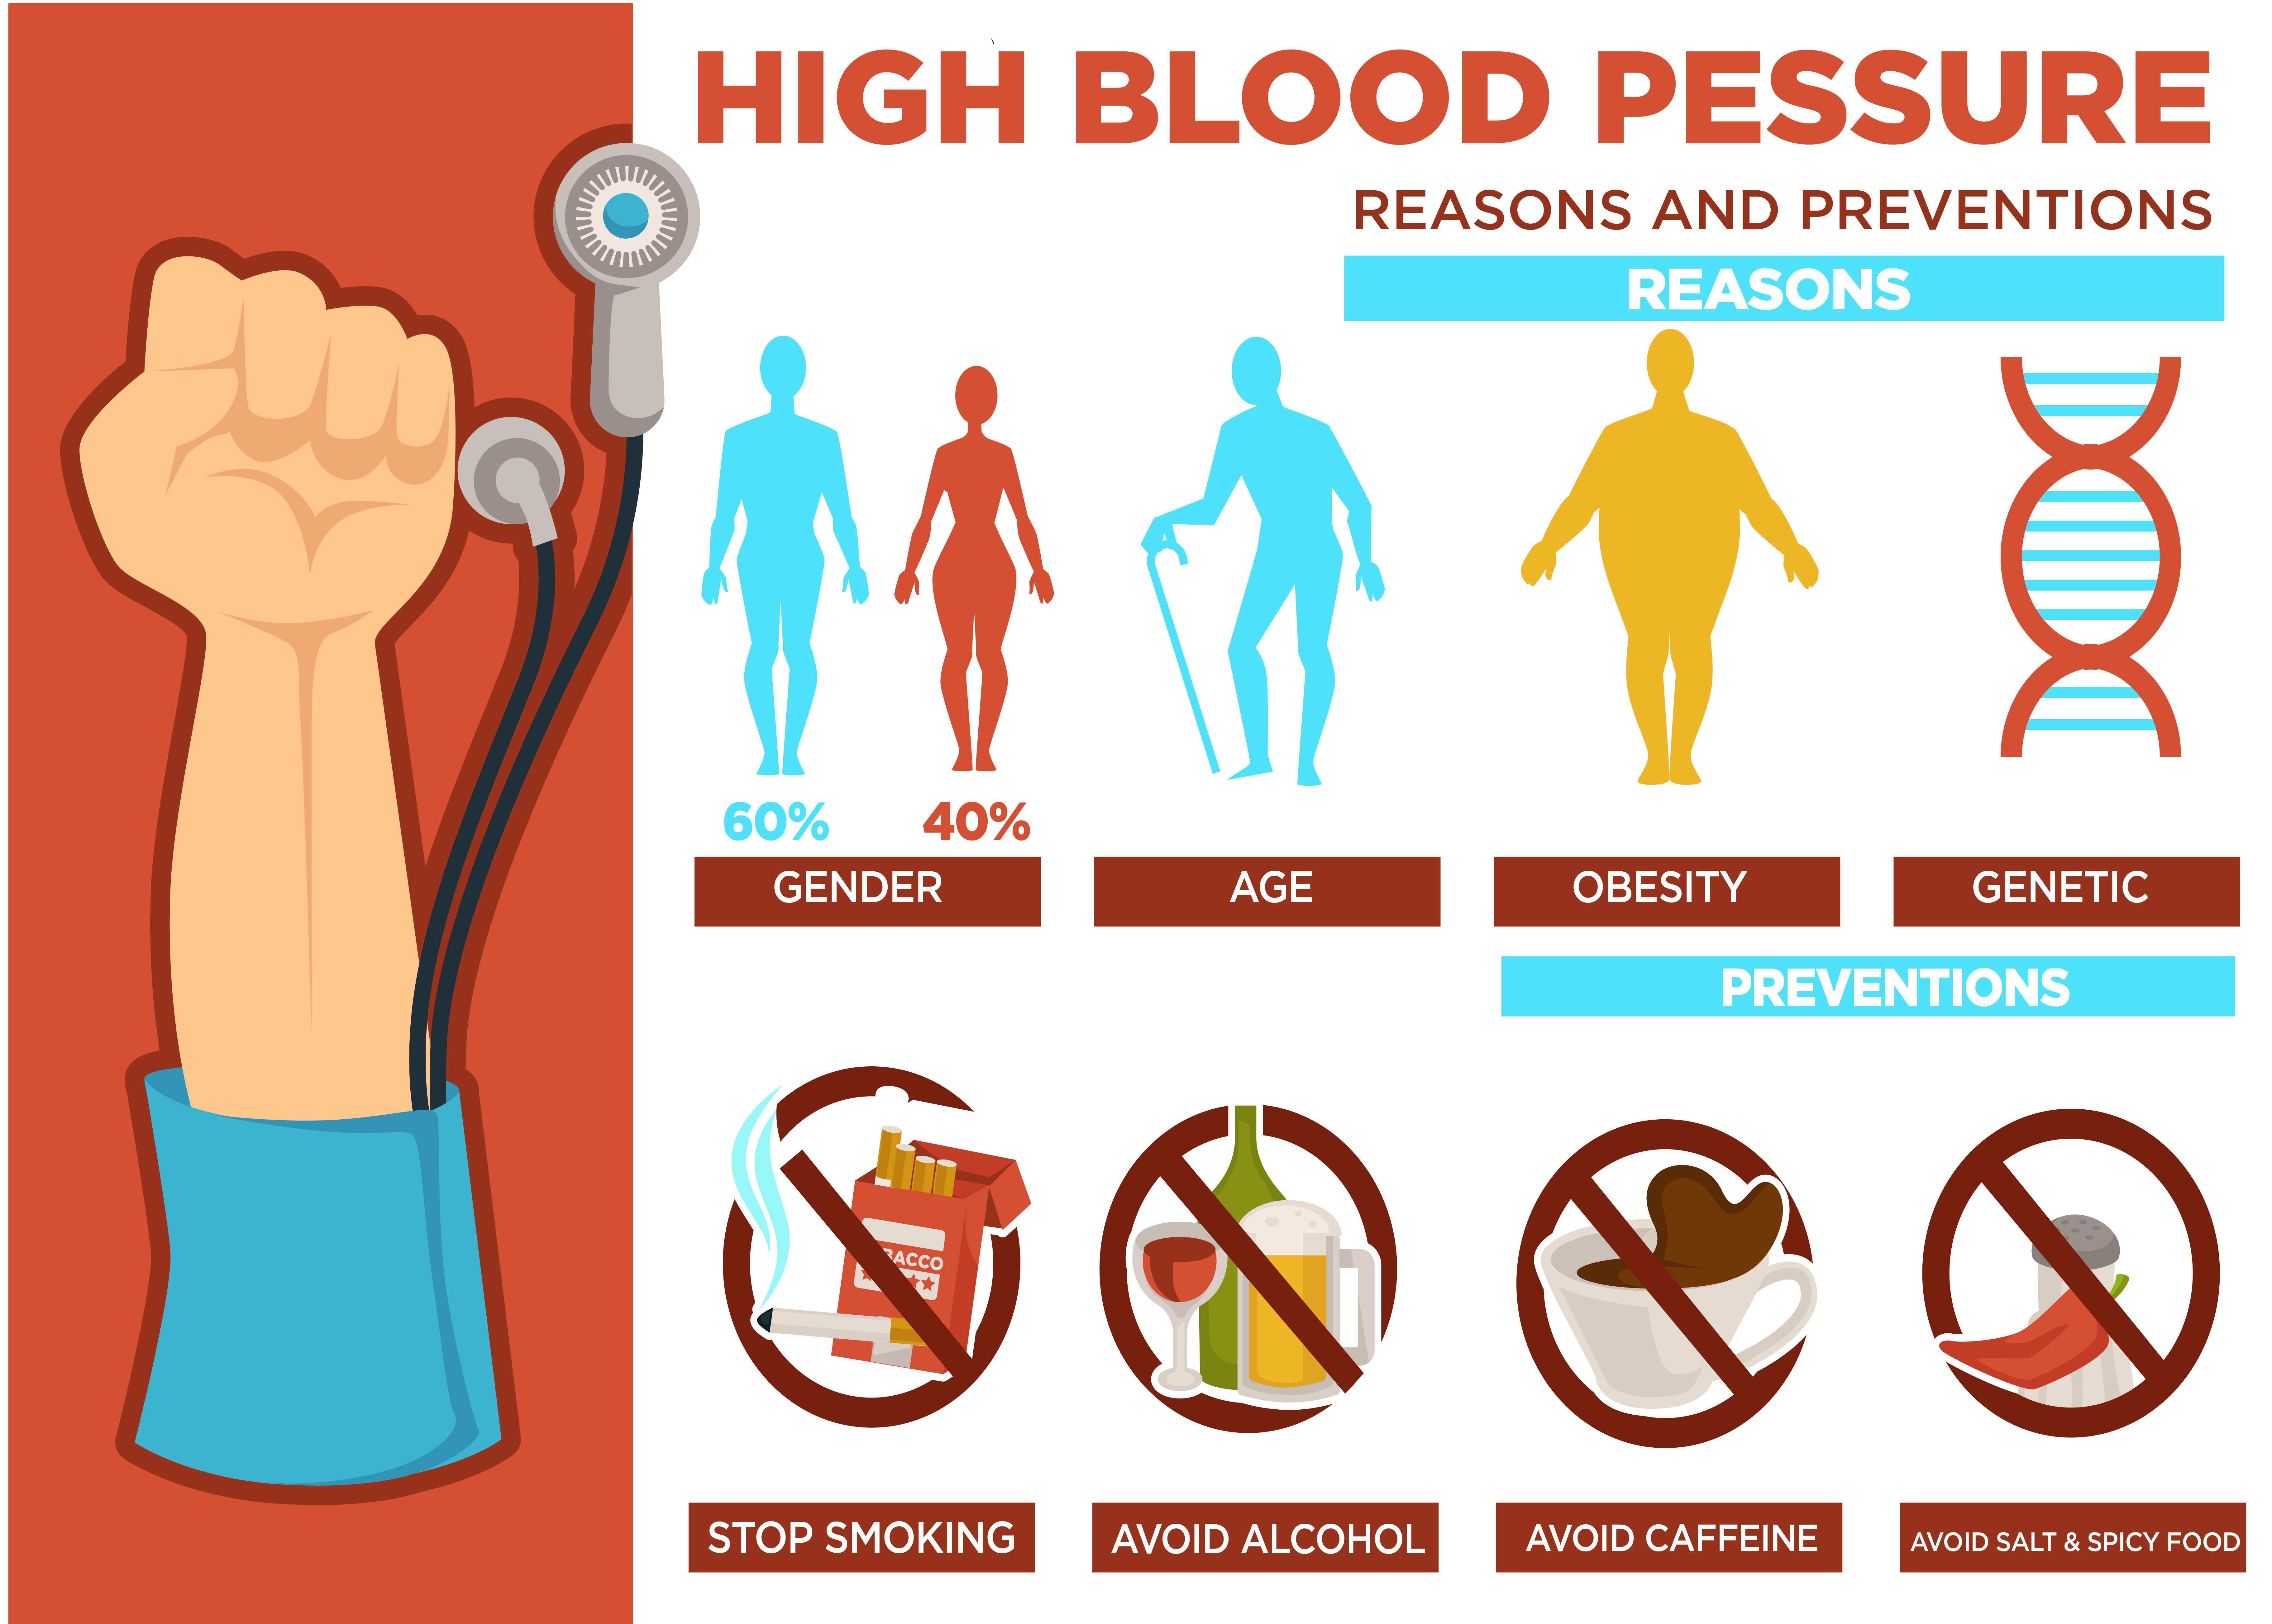 High Blood Pressure Causes & Prevention - Treatment @ MDIMC